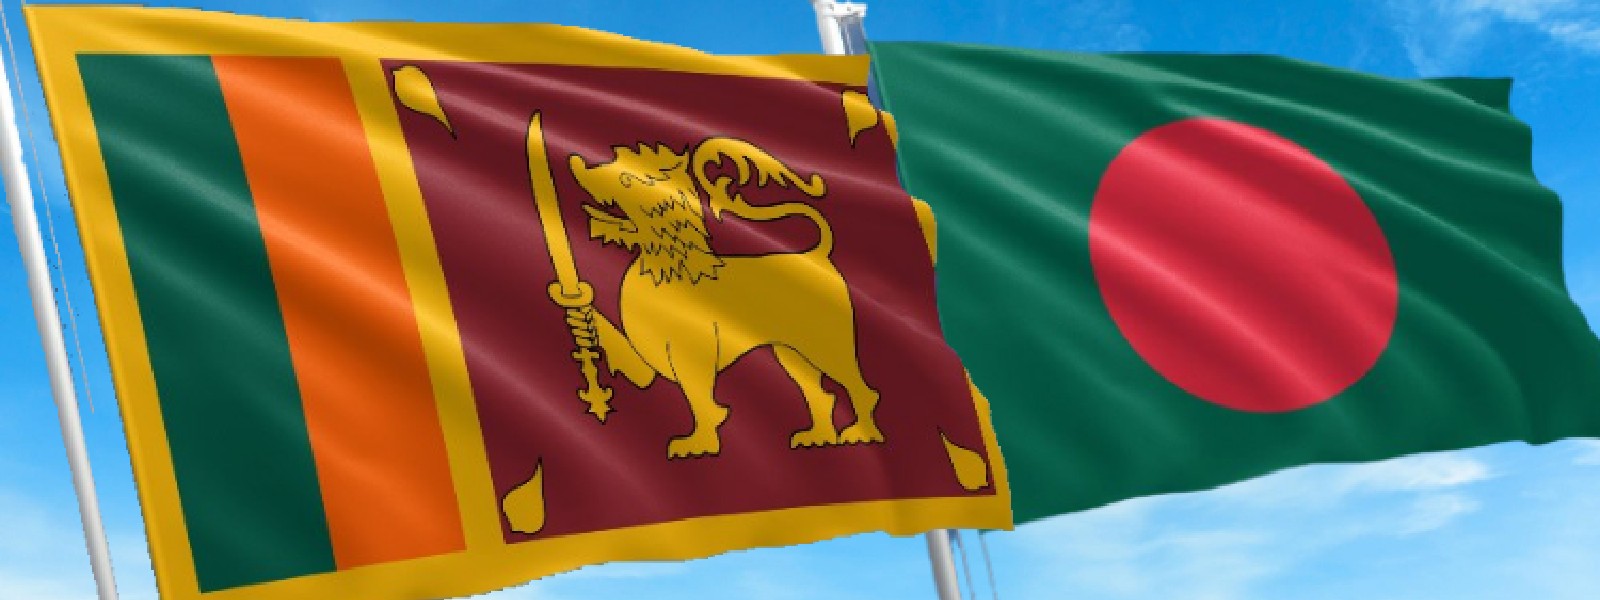 Sri Lanka gets six more months to pay back $200m loan